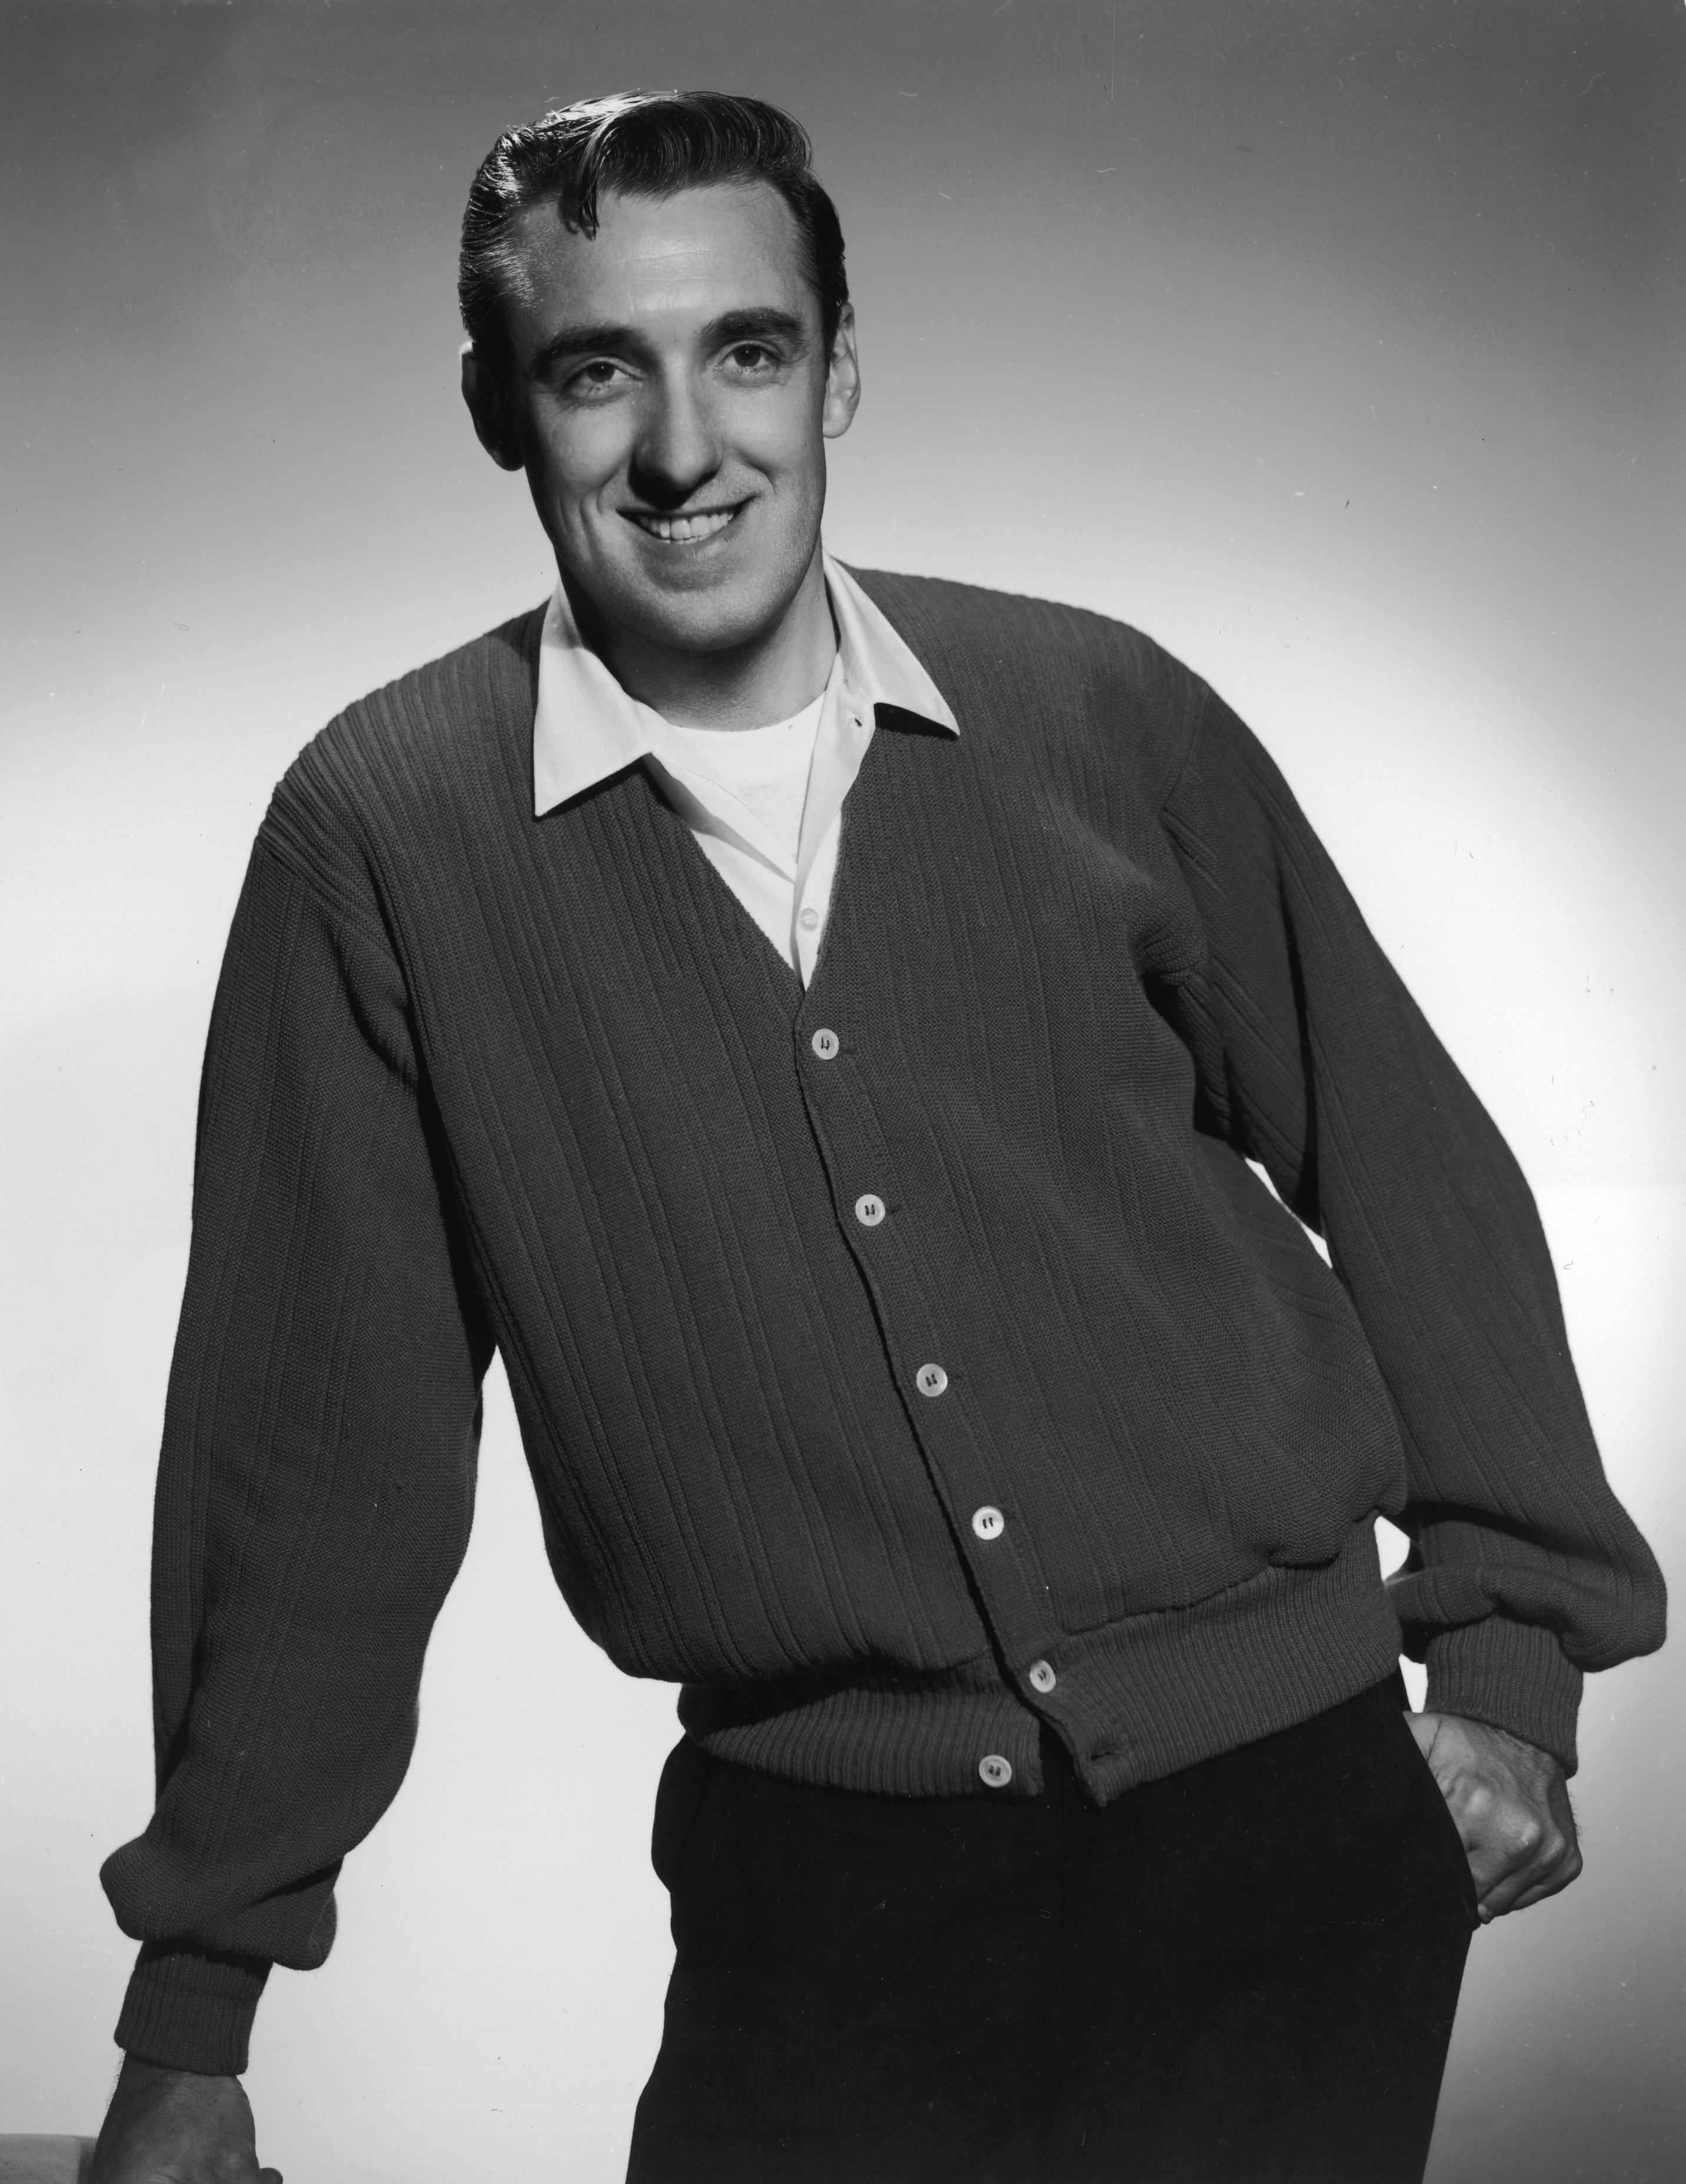 A studio portrait of singer Jim Nabors wearing a cardigan sweater and posing with one hand in his pocket in 1965. | Source: Getty Images